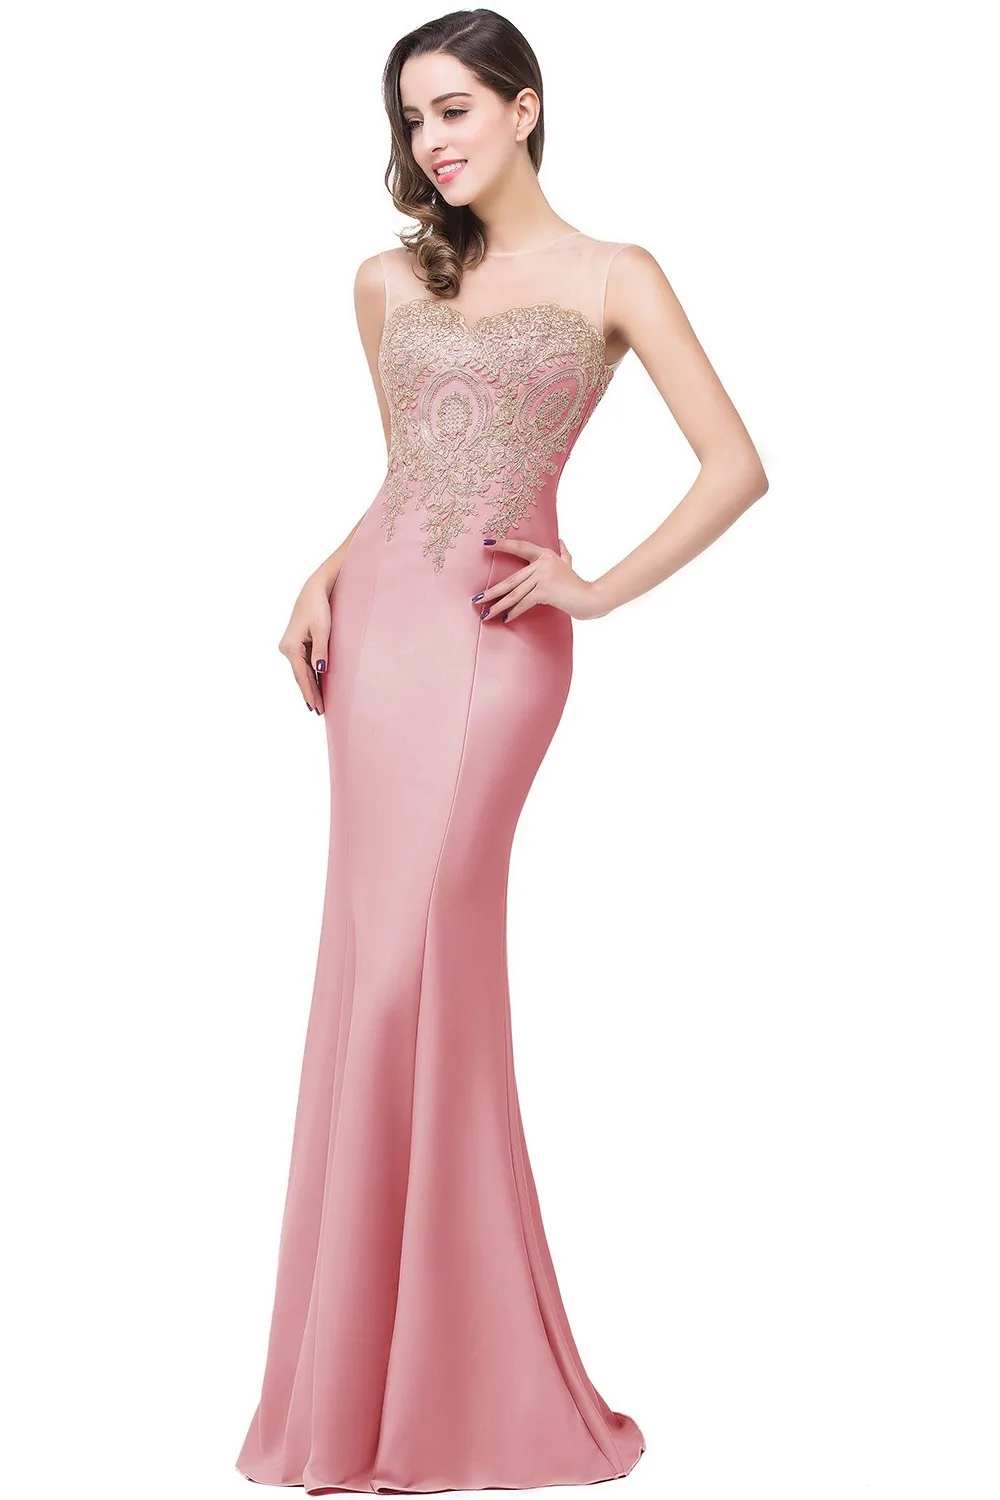 Banquet evening dress European and American sexy fishtail long backless long party dress drop shipping fulfill